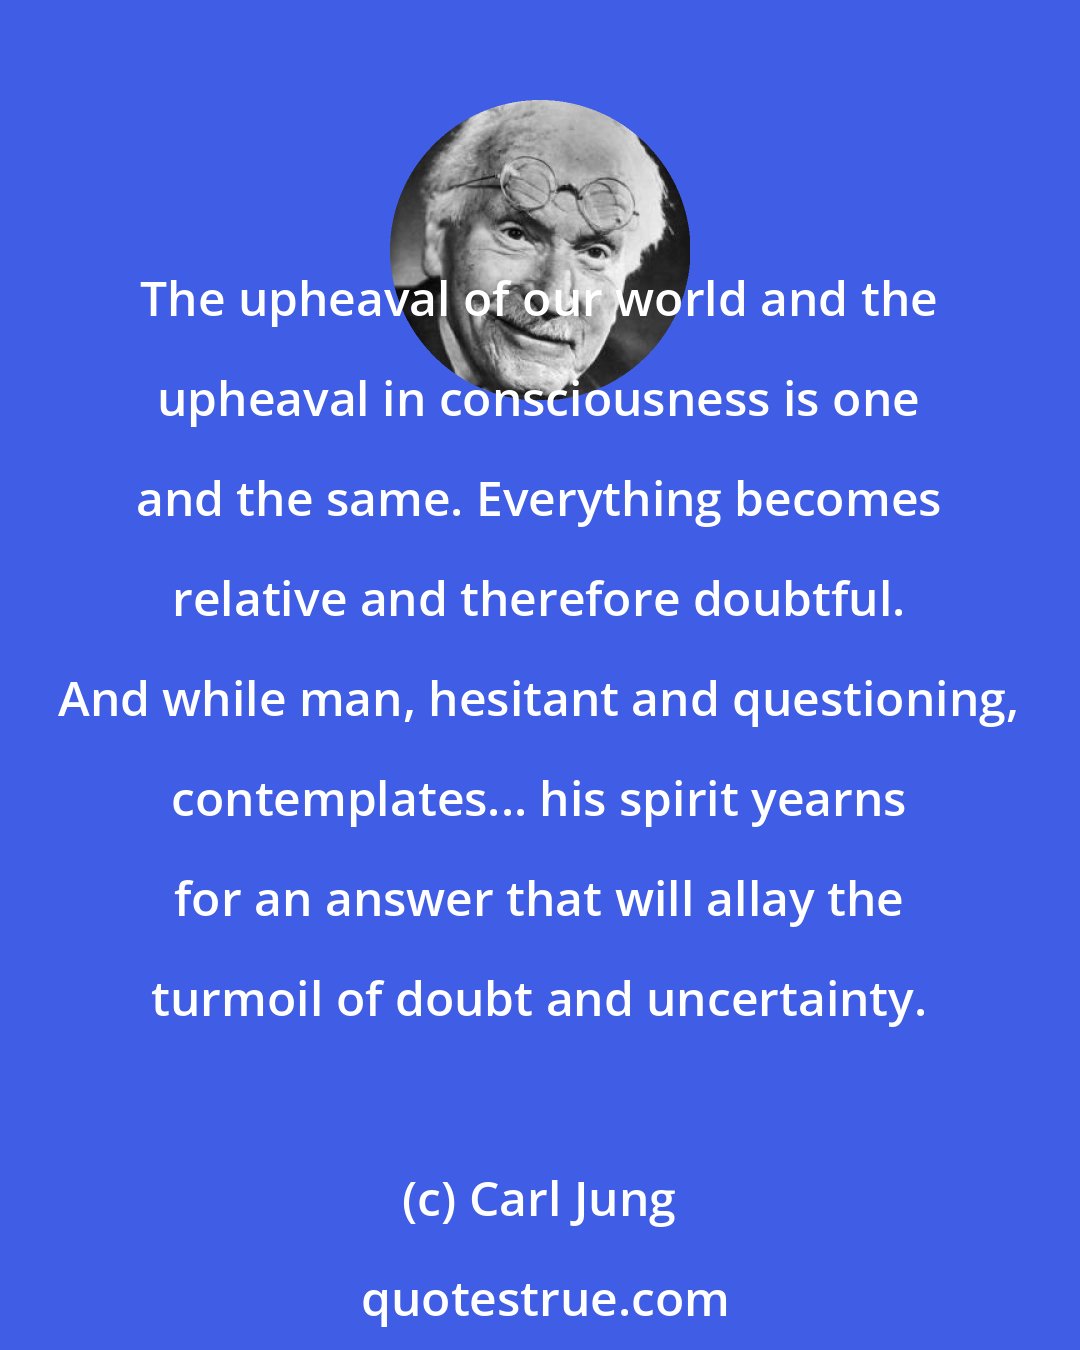 Carl Jung: The upheaval of our world and the upheaval in consciousness is one and the same. Everything becomes relative and therefore doubtful. And while man, hesitant and questioning, contemplates... his spirit yearns for an answer that will allay the turmoil of doubt and uncertainty.